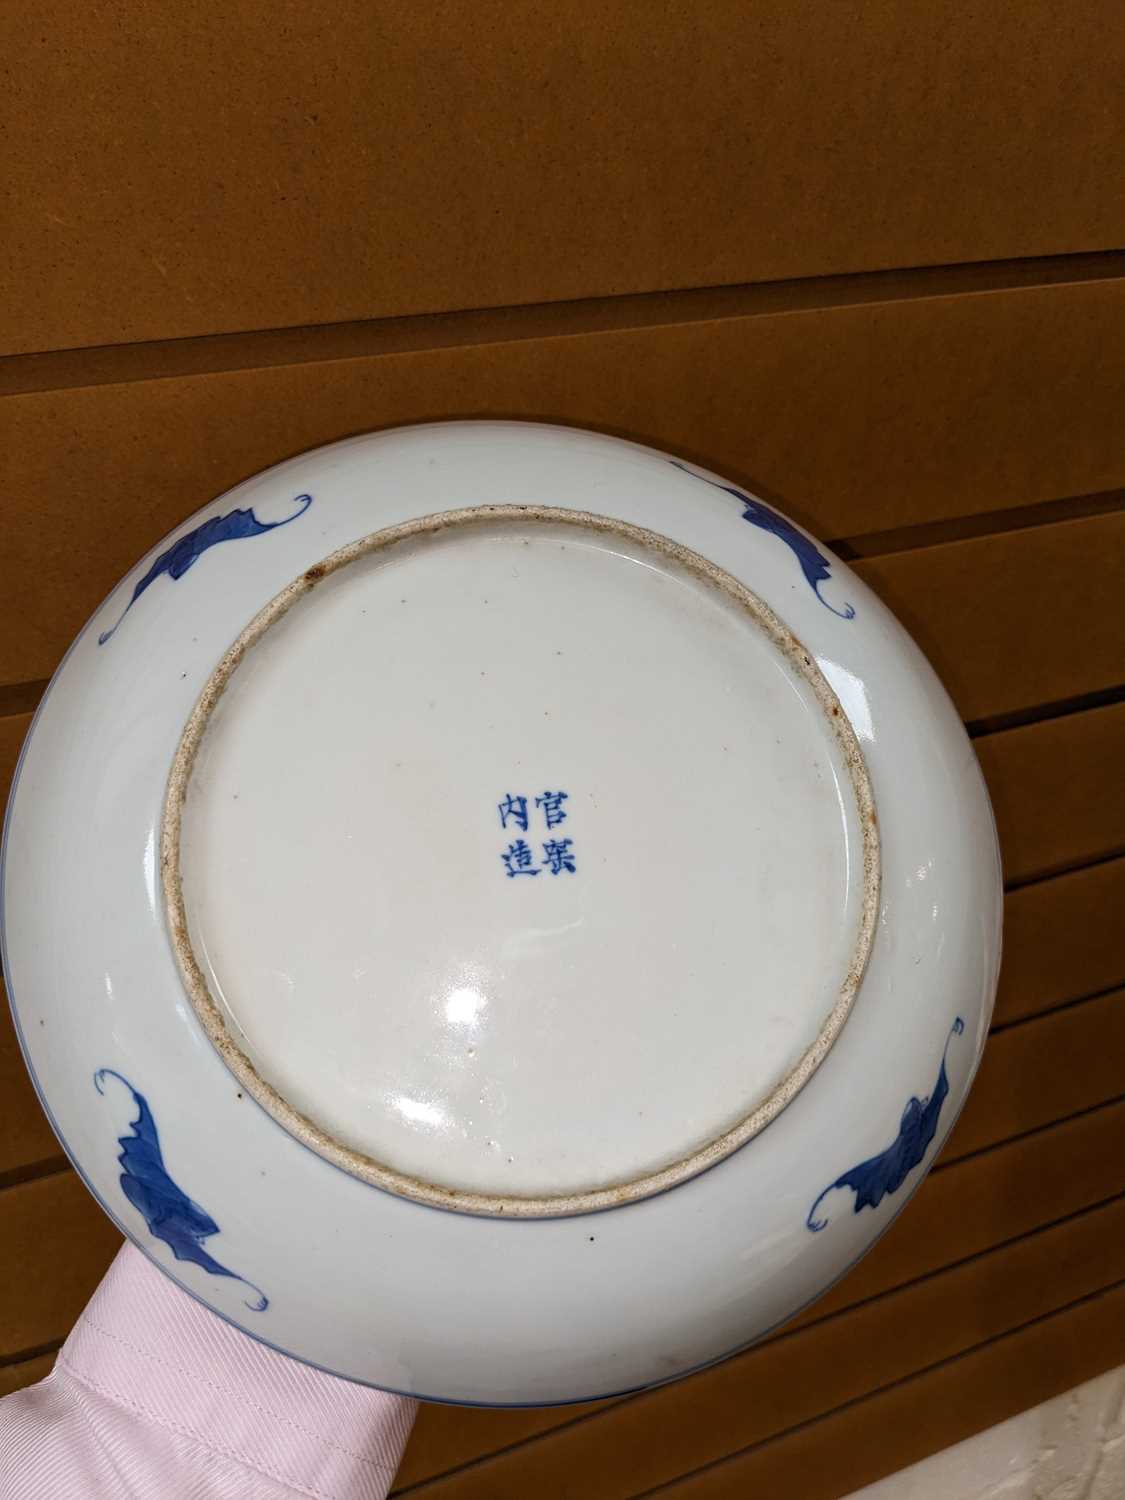 TWO SIMILAR CHINESE BLUE & WHITE 'LOTUS' SAUCER DISHES, painted in the Ming-style, one painted - Image 5 of 7